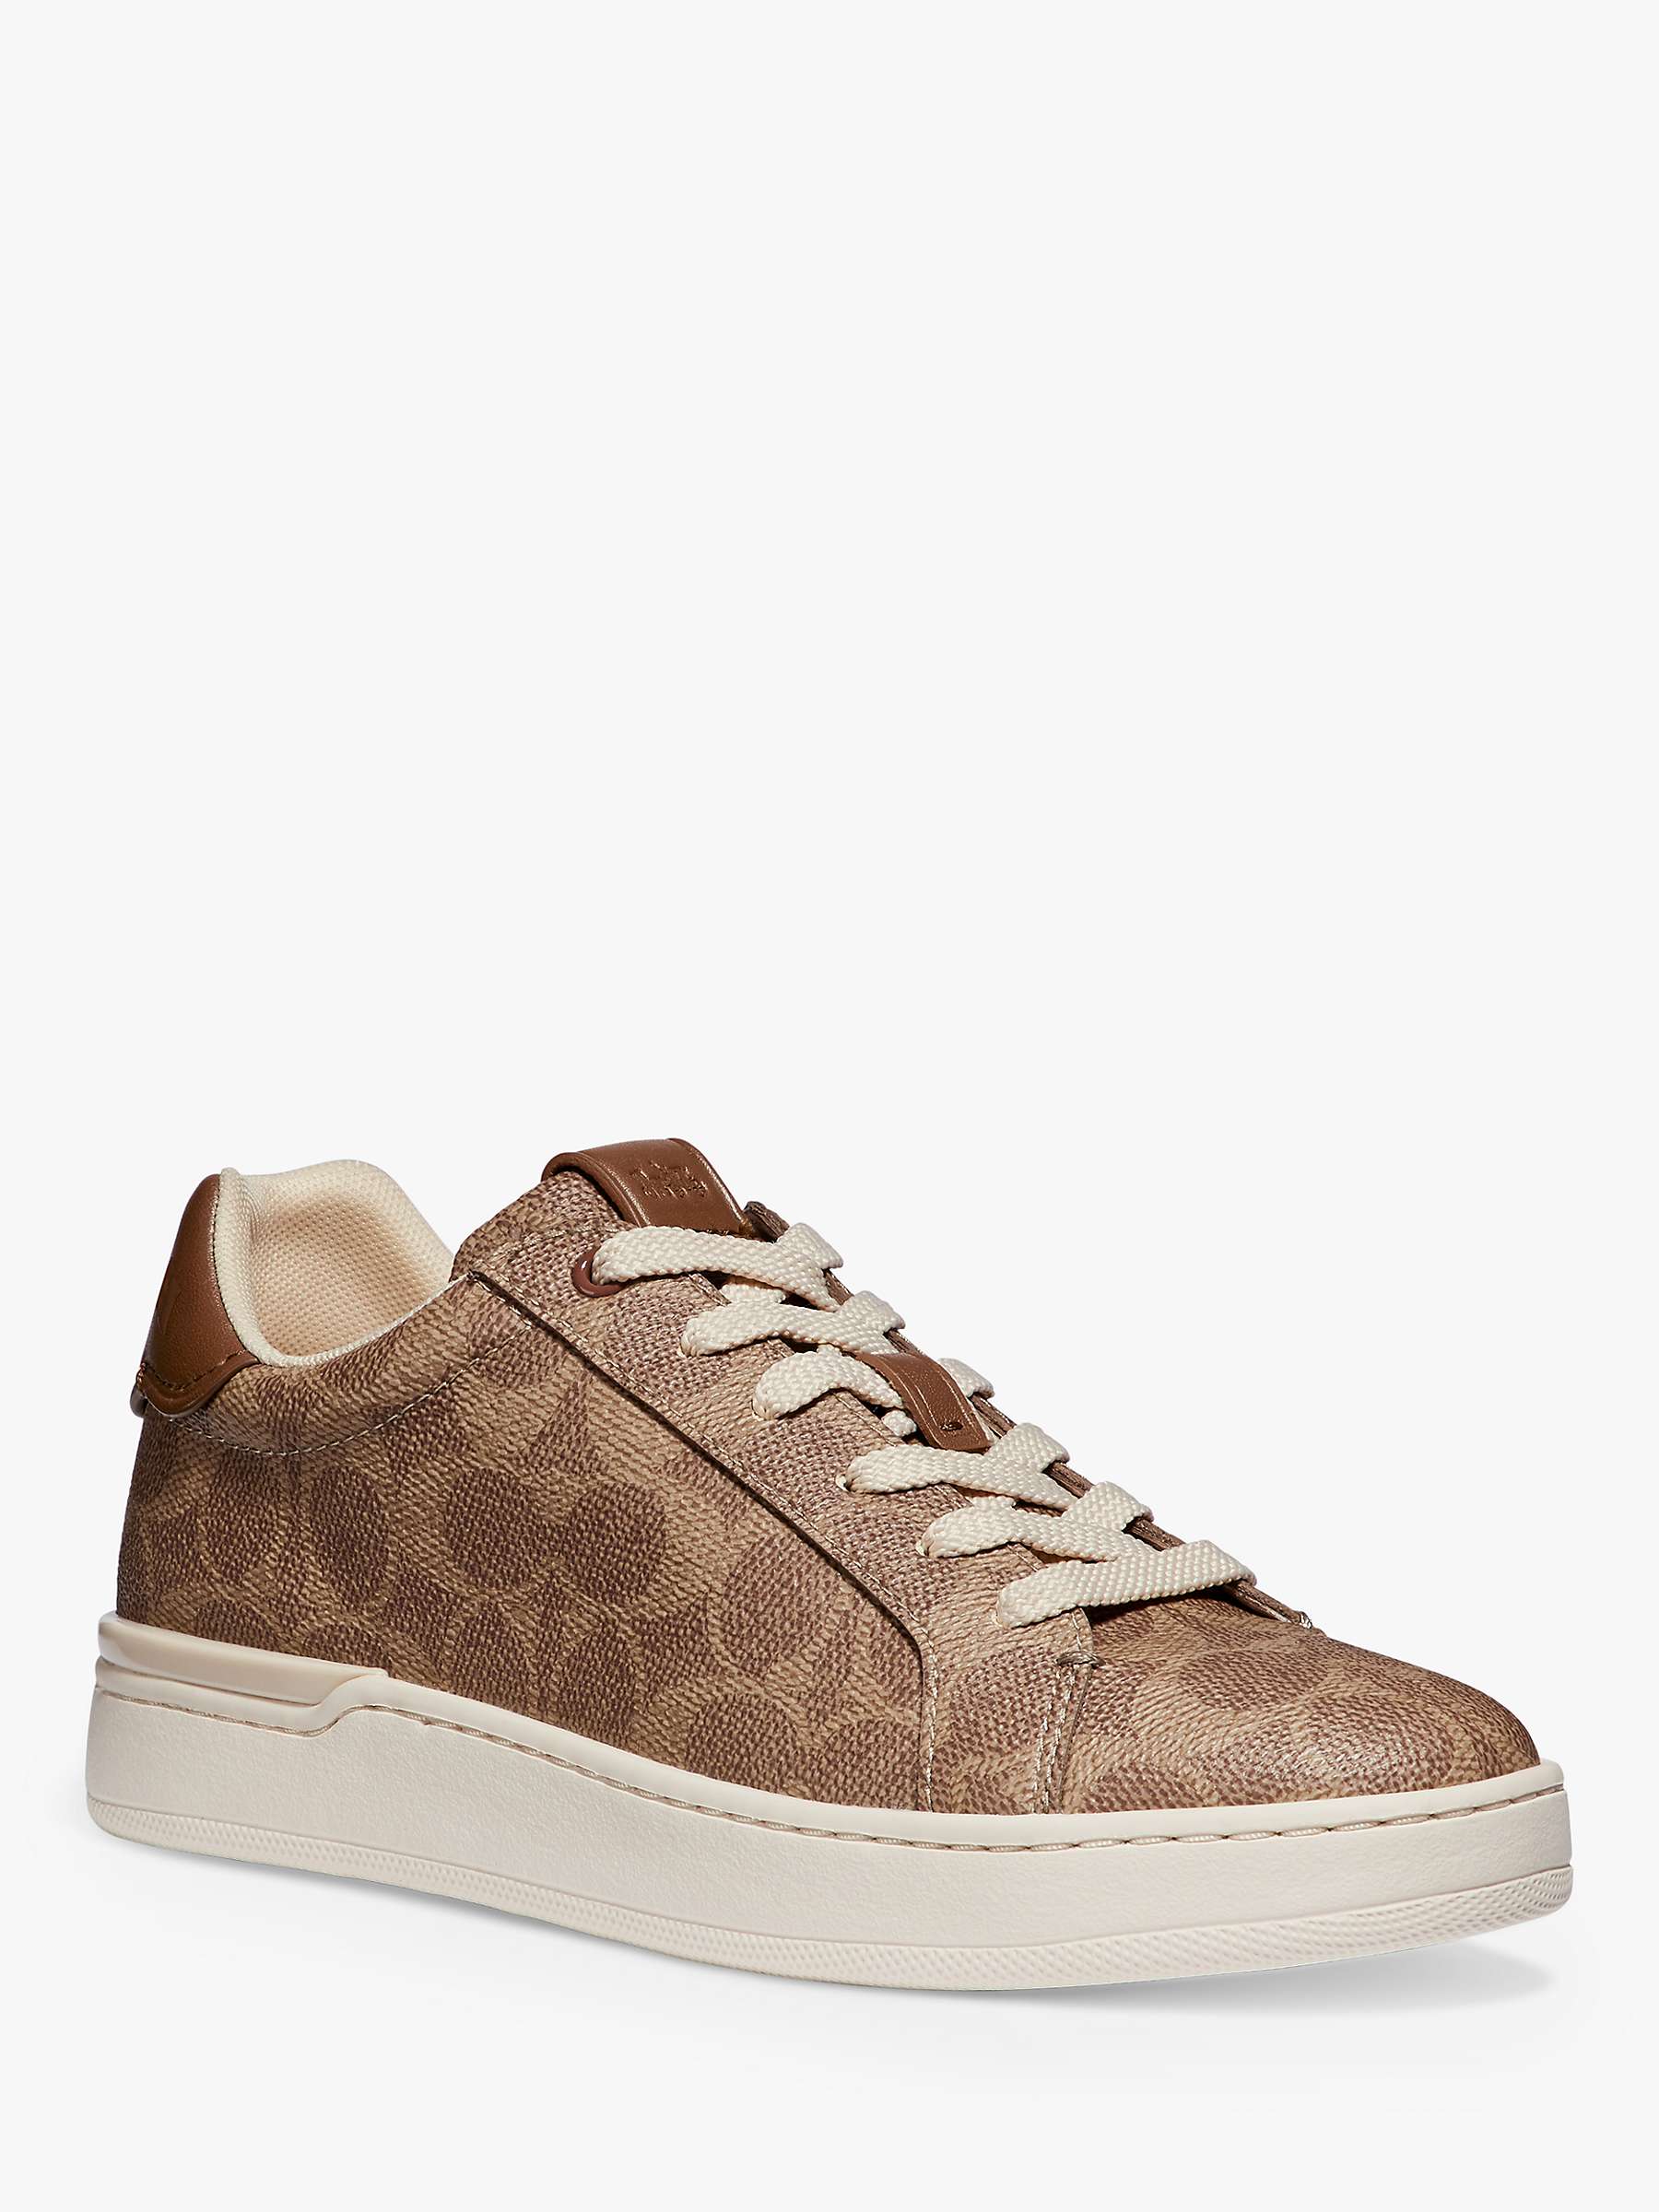 Buy Coach Lowline Logo Lace Up Casual Shoes, Tan Online at johnlewis.com